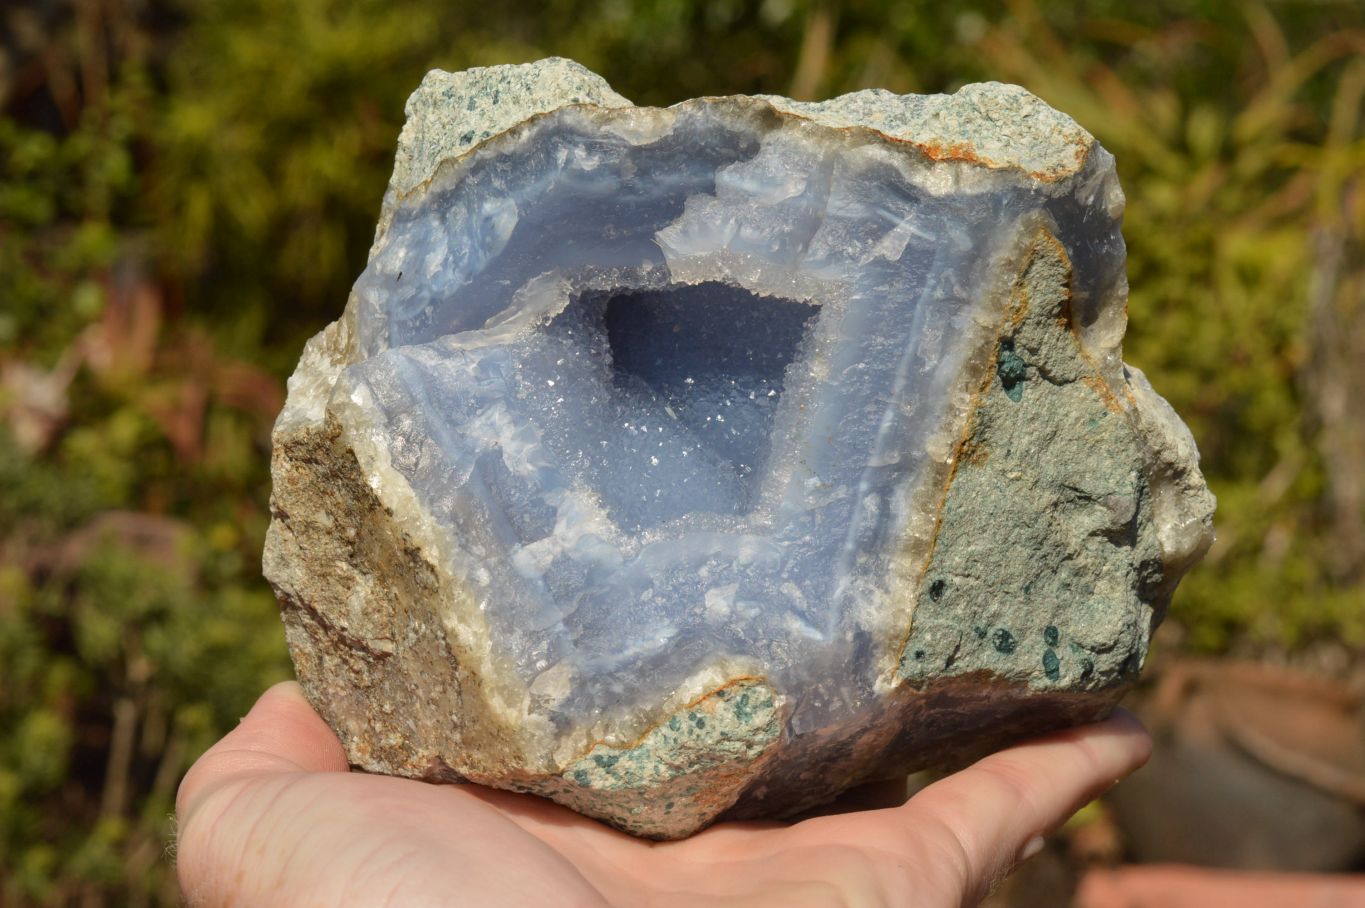 Natural Blue Lace Agate Geode Specimens x 2 From Nsanje, Malawi